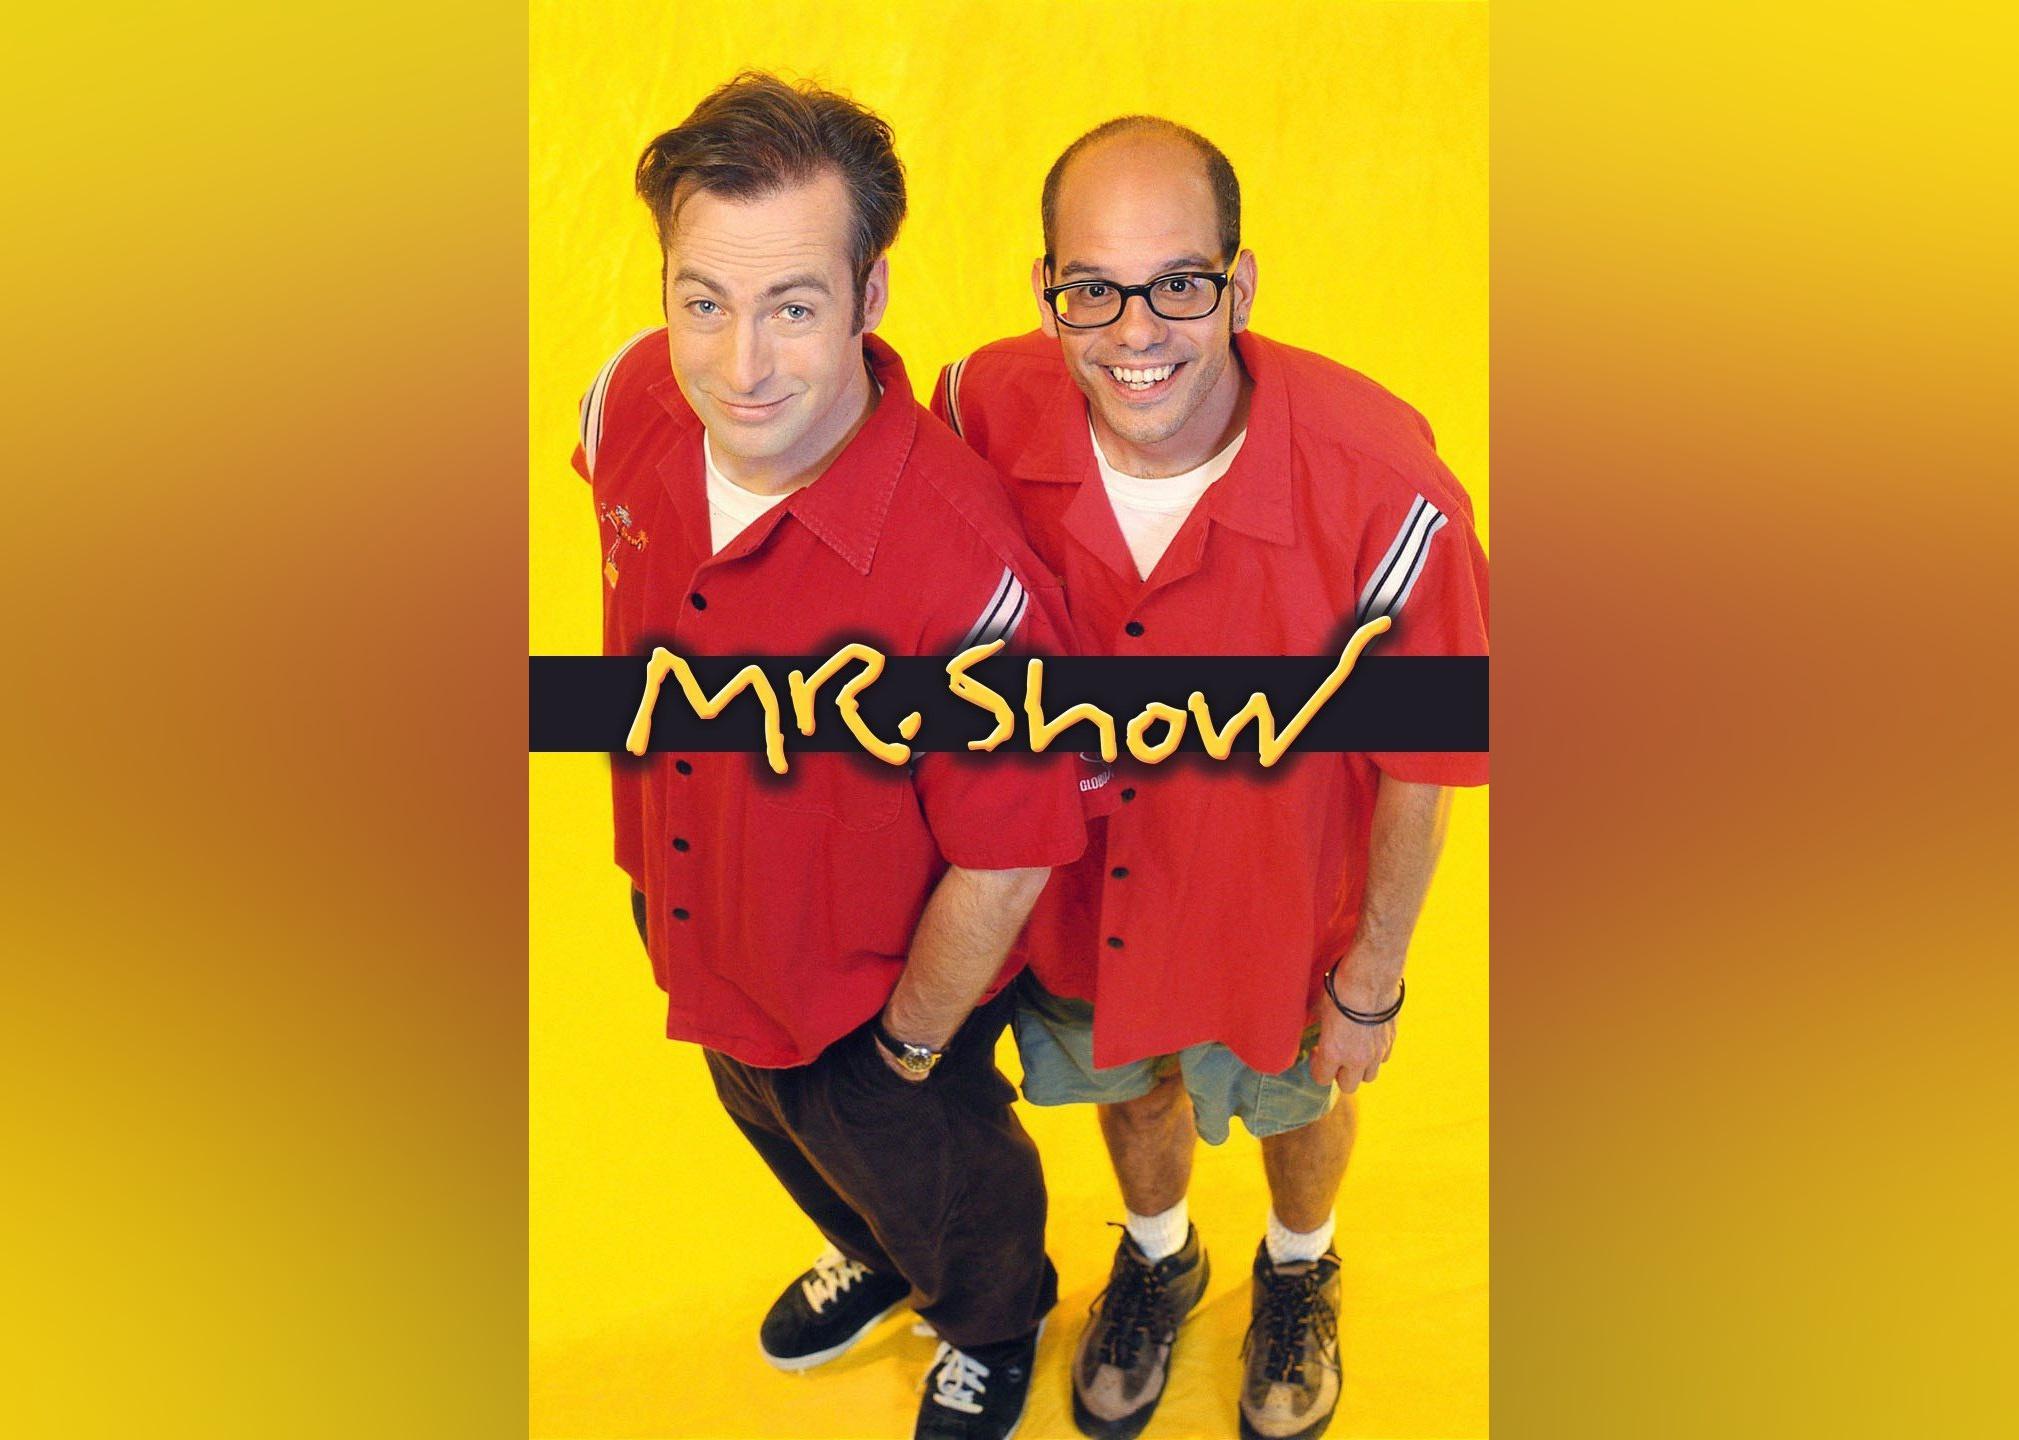 Bob Odenkirk and David Cross on the TV poster.